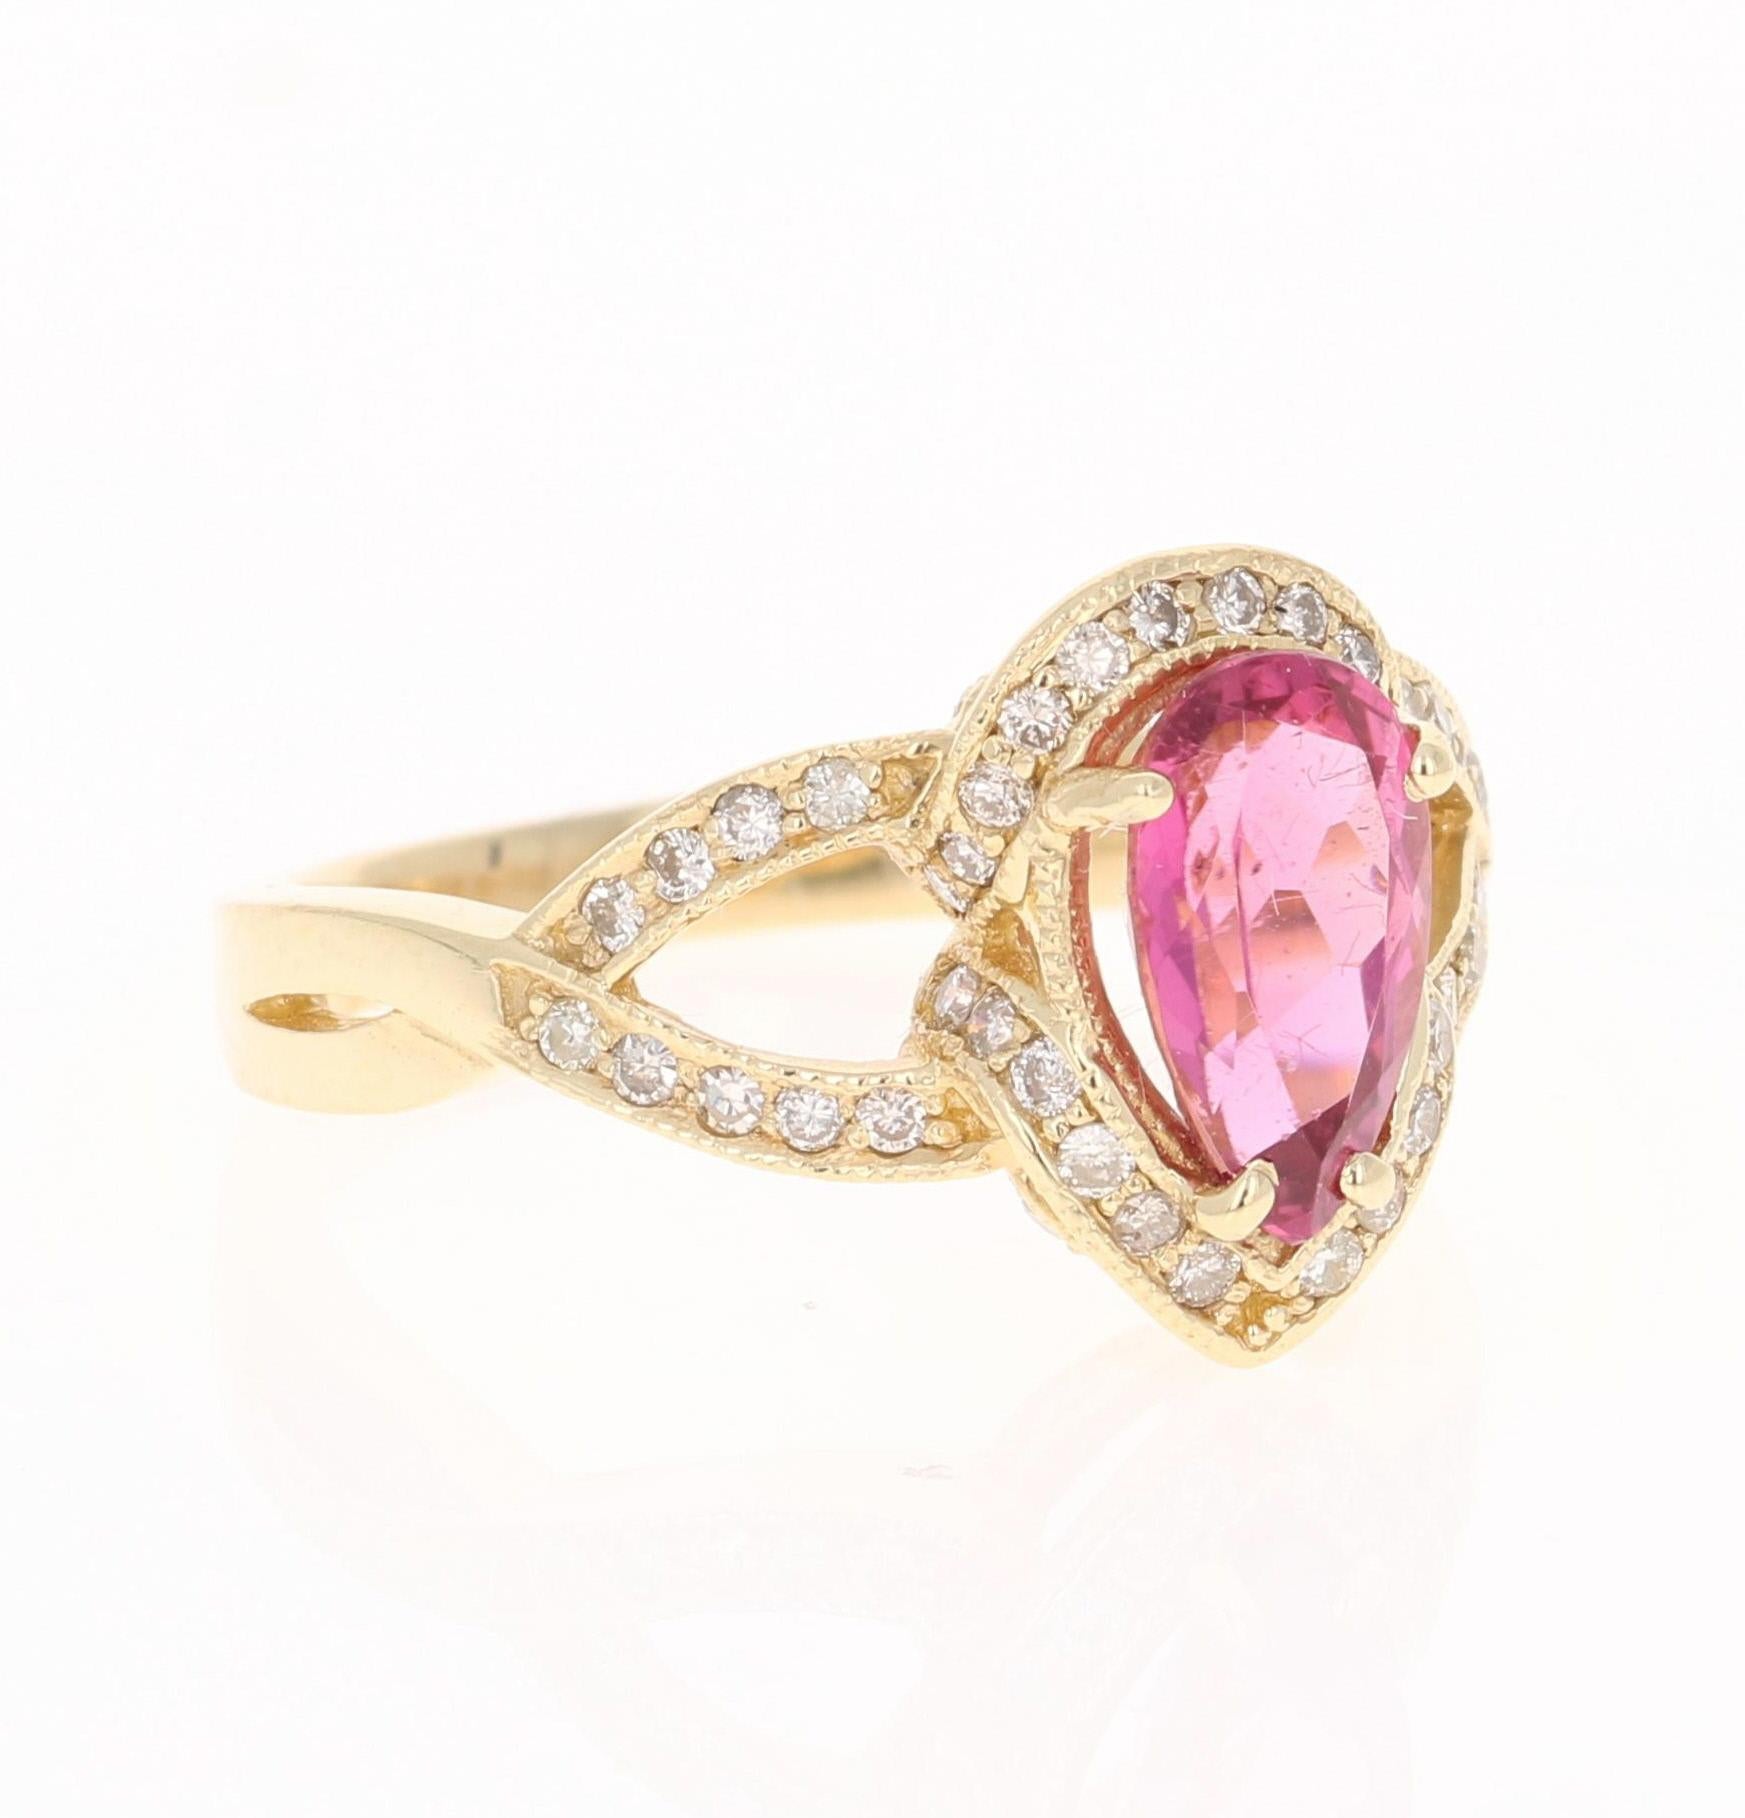 This ring has a pretty Pear Cut Pink Tourmaline that weighs 1.38 Carats. Floating around the tourmaline is 51 Round Cut Diamonds that weigh 0.41 Carats. The total carat weight of the ring is 1.79 Carats.   The measurements of the Tourmaline are 6mm